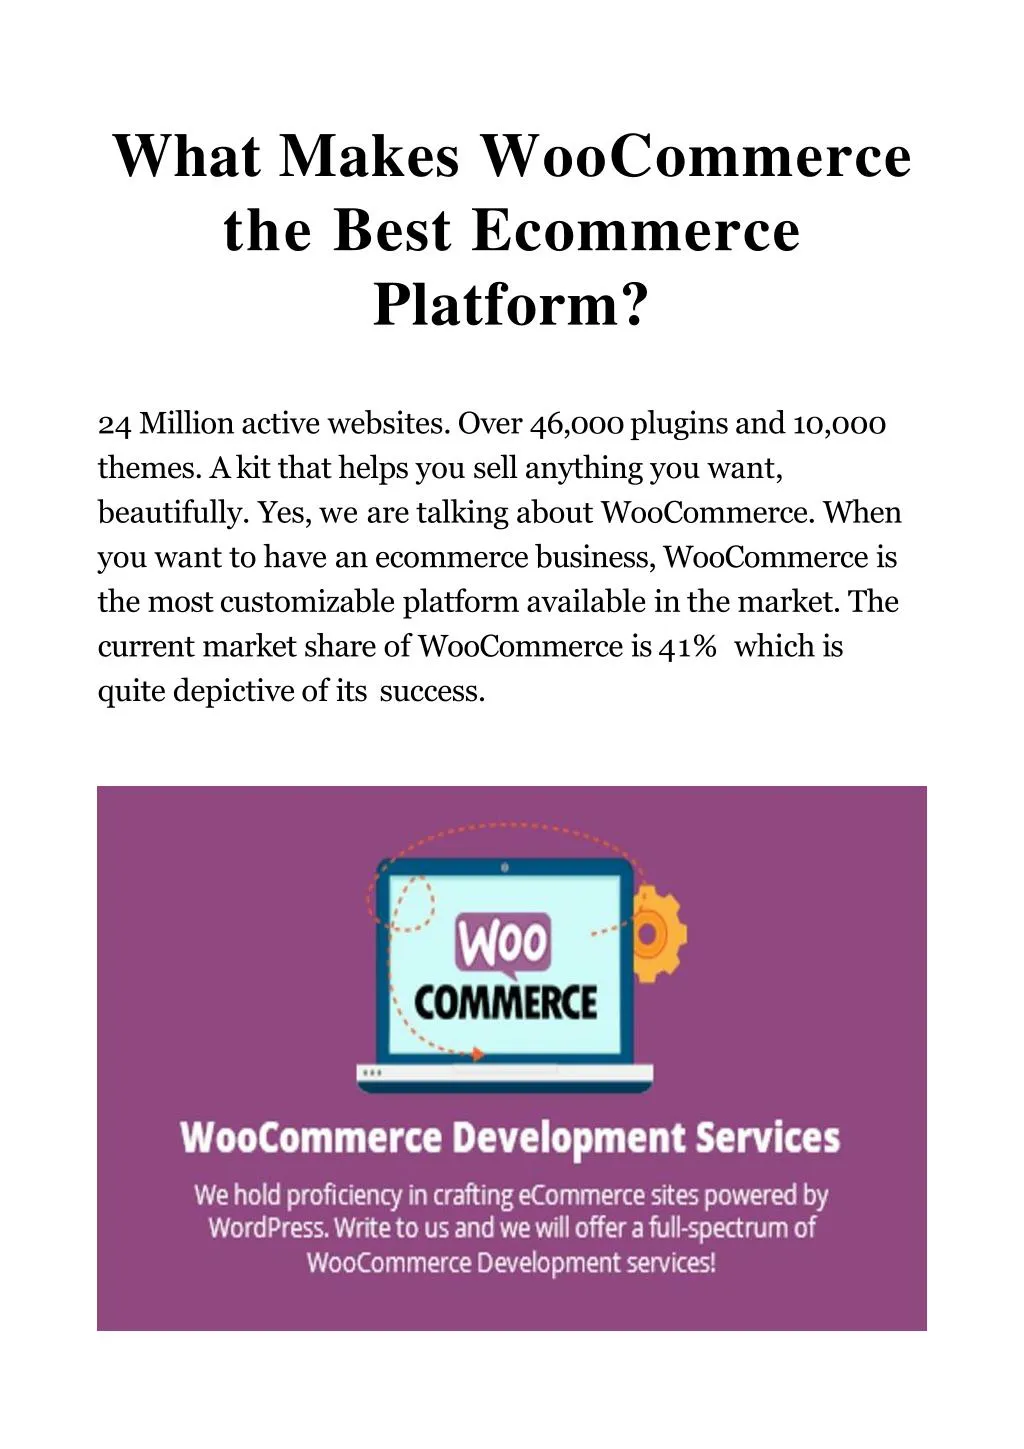 what makes woocommerce the best ecommerce platform